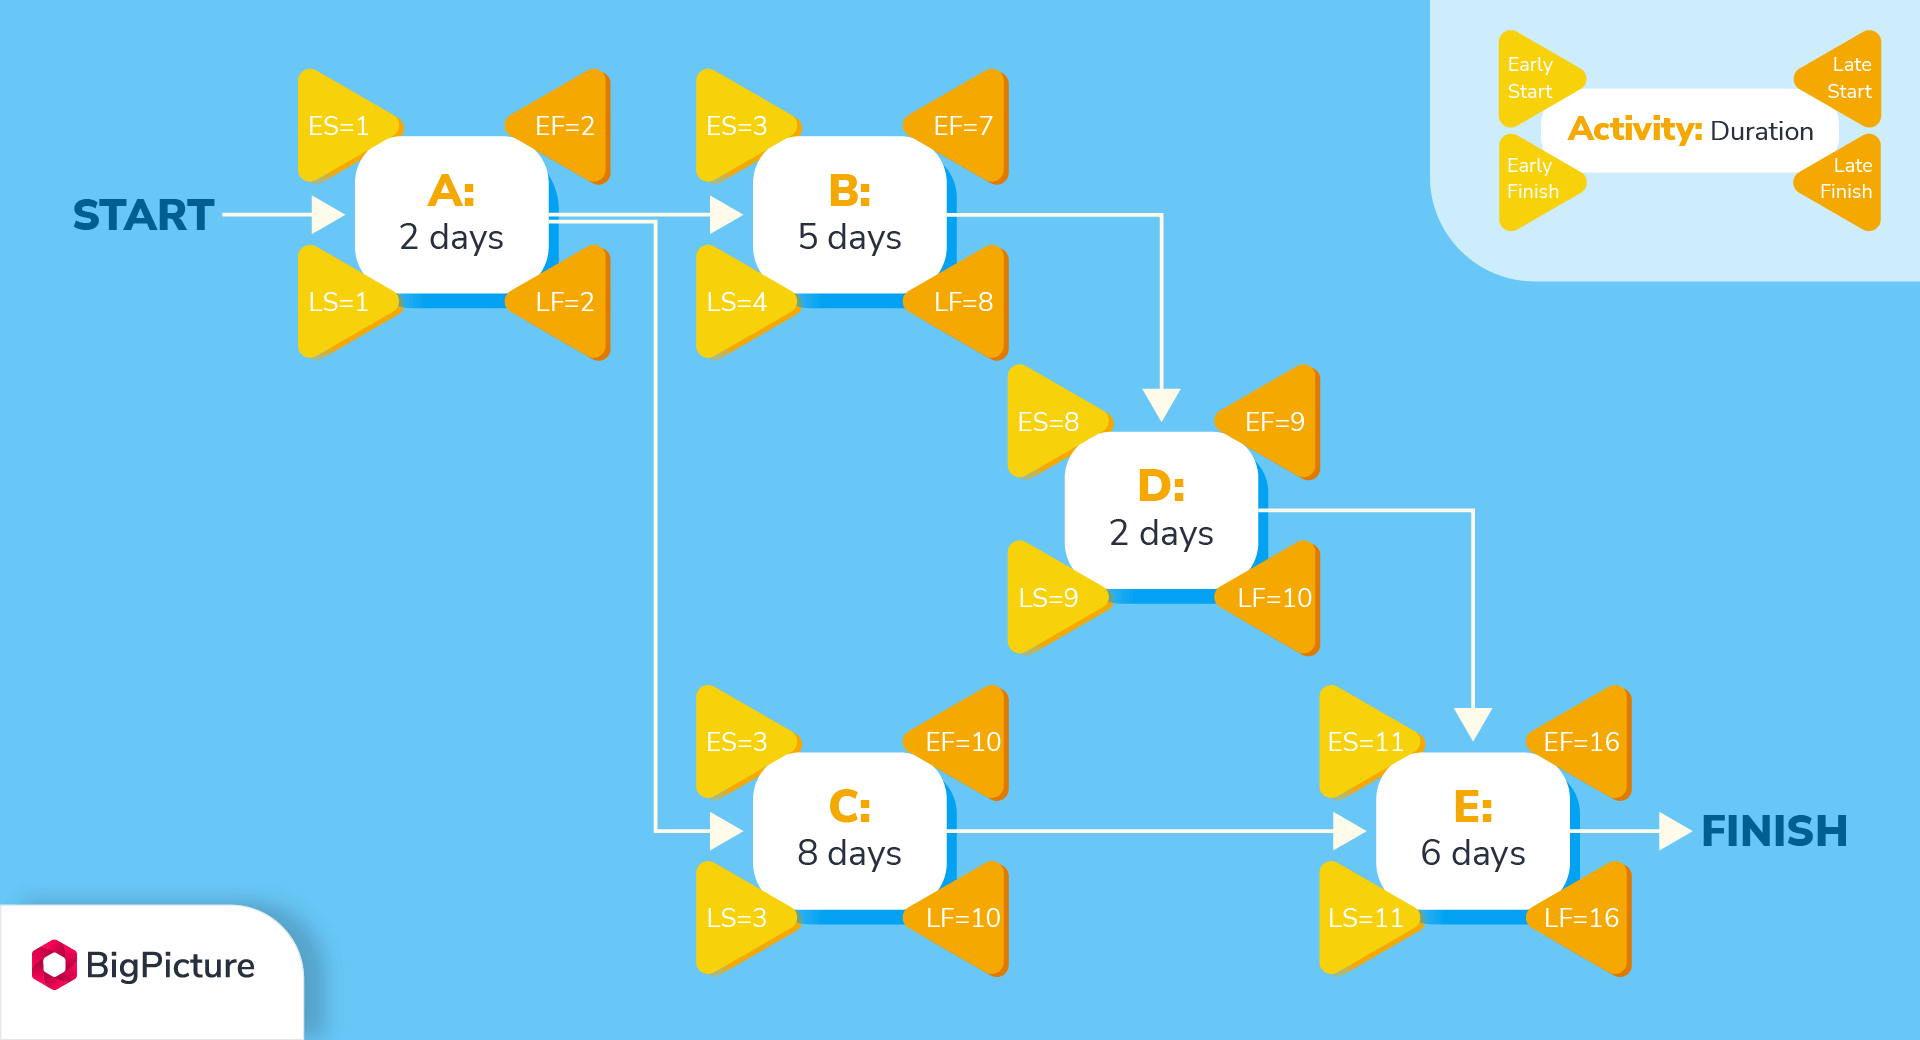 The network diagram with Late Start and Late Finish values